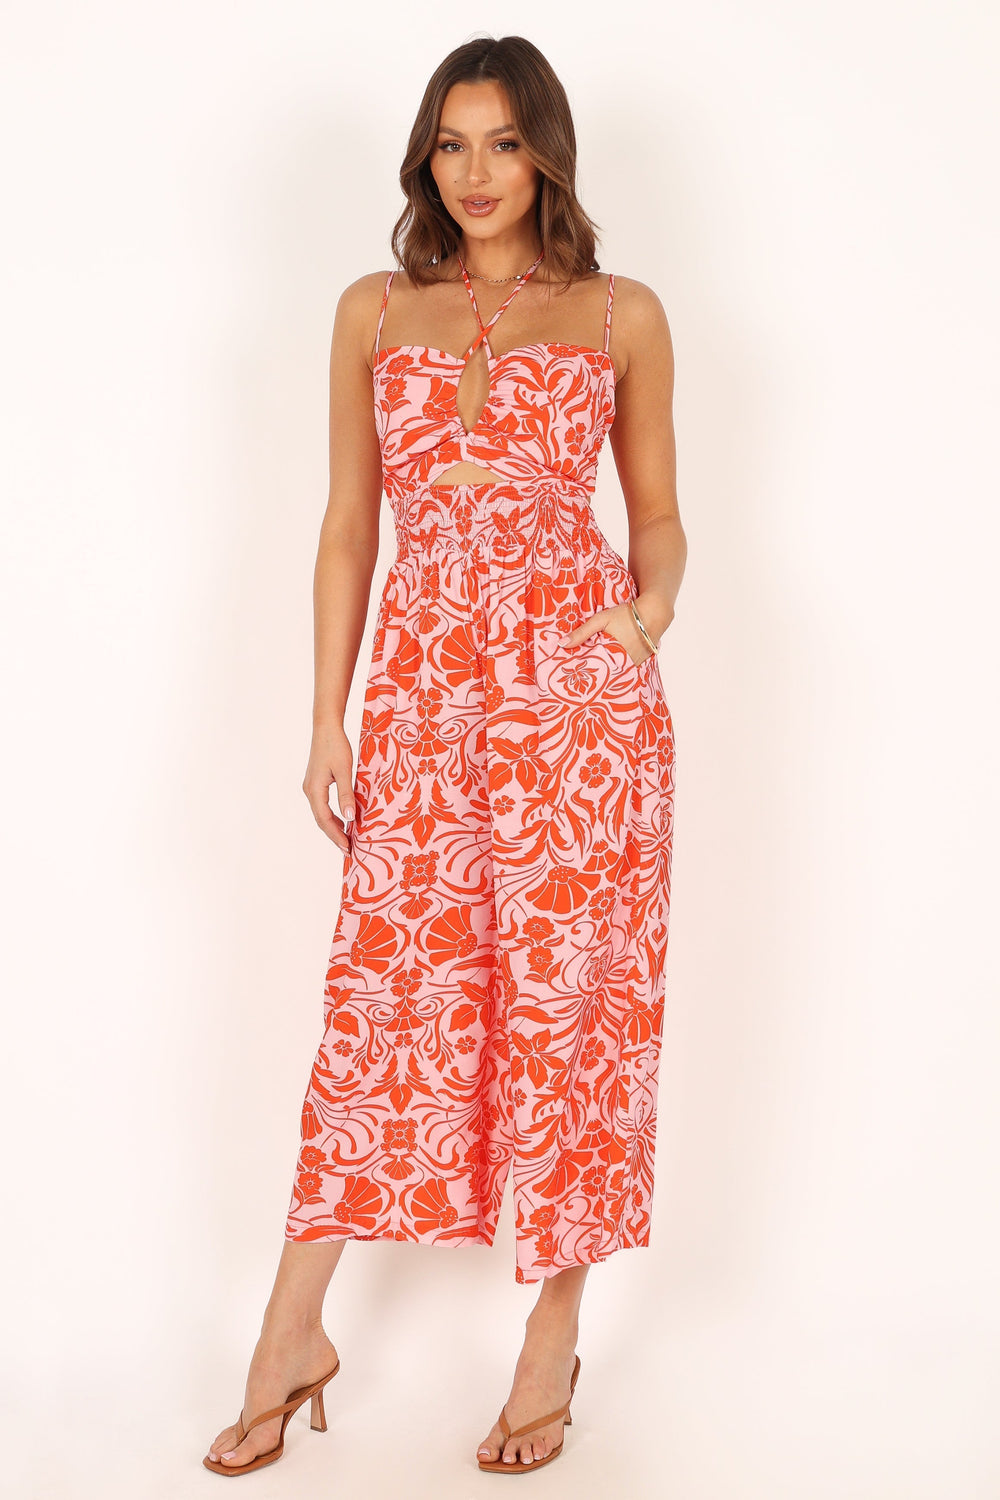 Petal and Pup USA Rompers Sydney Halter Jumpsuit - Coral